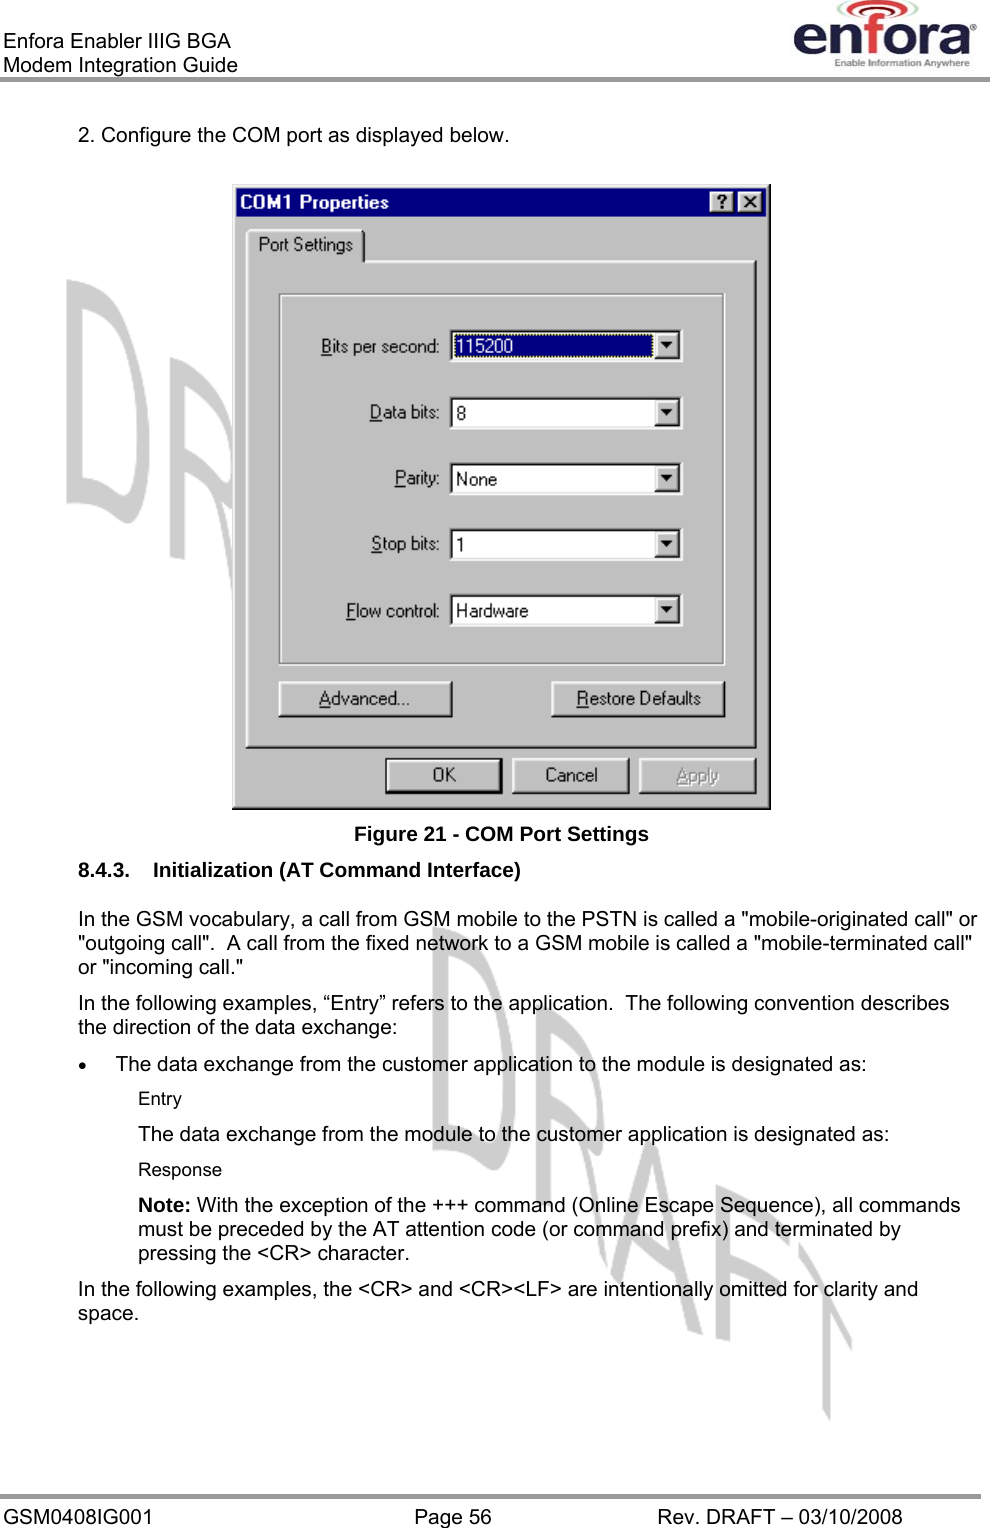 Enfora Enabler IIIG BGA Modem Integration Guide 2. Configure the COM port as displayed below.  Figure 21 - COM Port Settings 8.4.3.  Initialization (AT Command Interface) In the GSM vocabulary, a call from GSM mobile to the PSTN is called a &quot;mobile-originated call&quot; or &quot;outgoing call&quot;.  A call from the fixed network to a GSM mobile is called a &quot;mobile-terminated call&quot; or &quot;incoming call.&quot; In the following examples, “Entry” refers to the application.  The following convention describes the direction of the data exchange: •  The data exchange from the customer application to the module is designated as: Entry The data exchange from the module to the customer application is designated as: Response Note: With the exception of the +++ command (Online Escape Sequence), all commands must be preceded by the AT attention code (or command prefix) and terminated by pressing the &lt;CR&gt; character. In the following examples, the &lt;CR&gt; and &lt;CR&gt;&lt;LF&gt; are intentionally omitted for clarity and space. GSM0408IG001  Page 56  Rev. DRAFT – 03/10/2008 